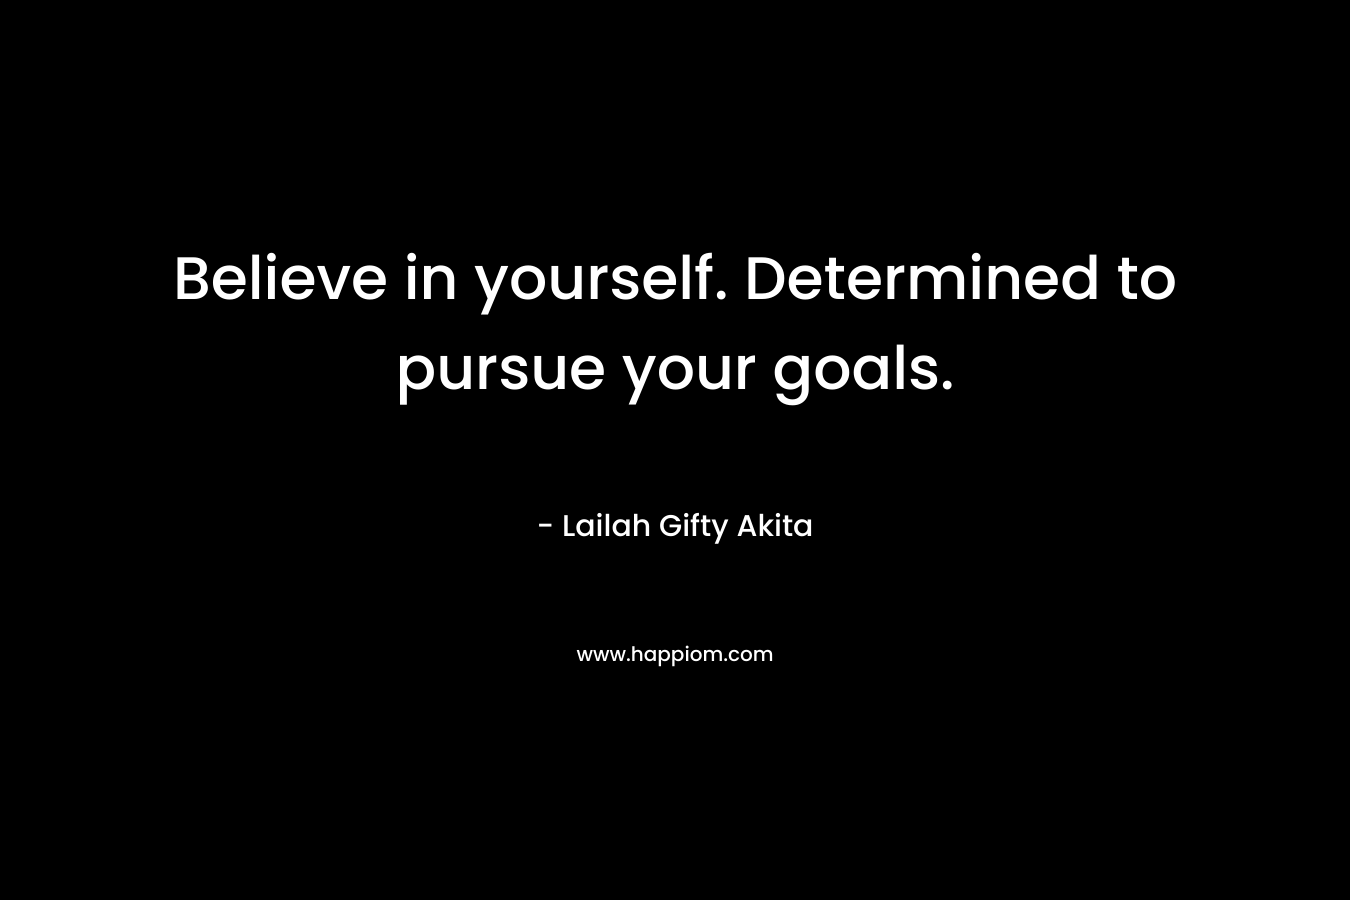 Believe in yourself. Determined to pursue your goals.